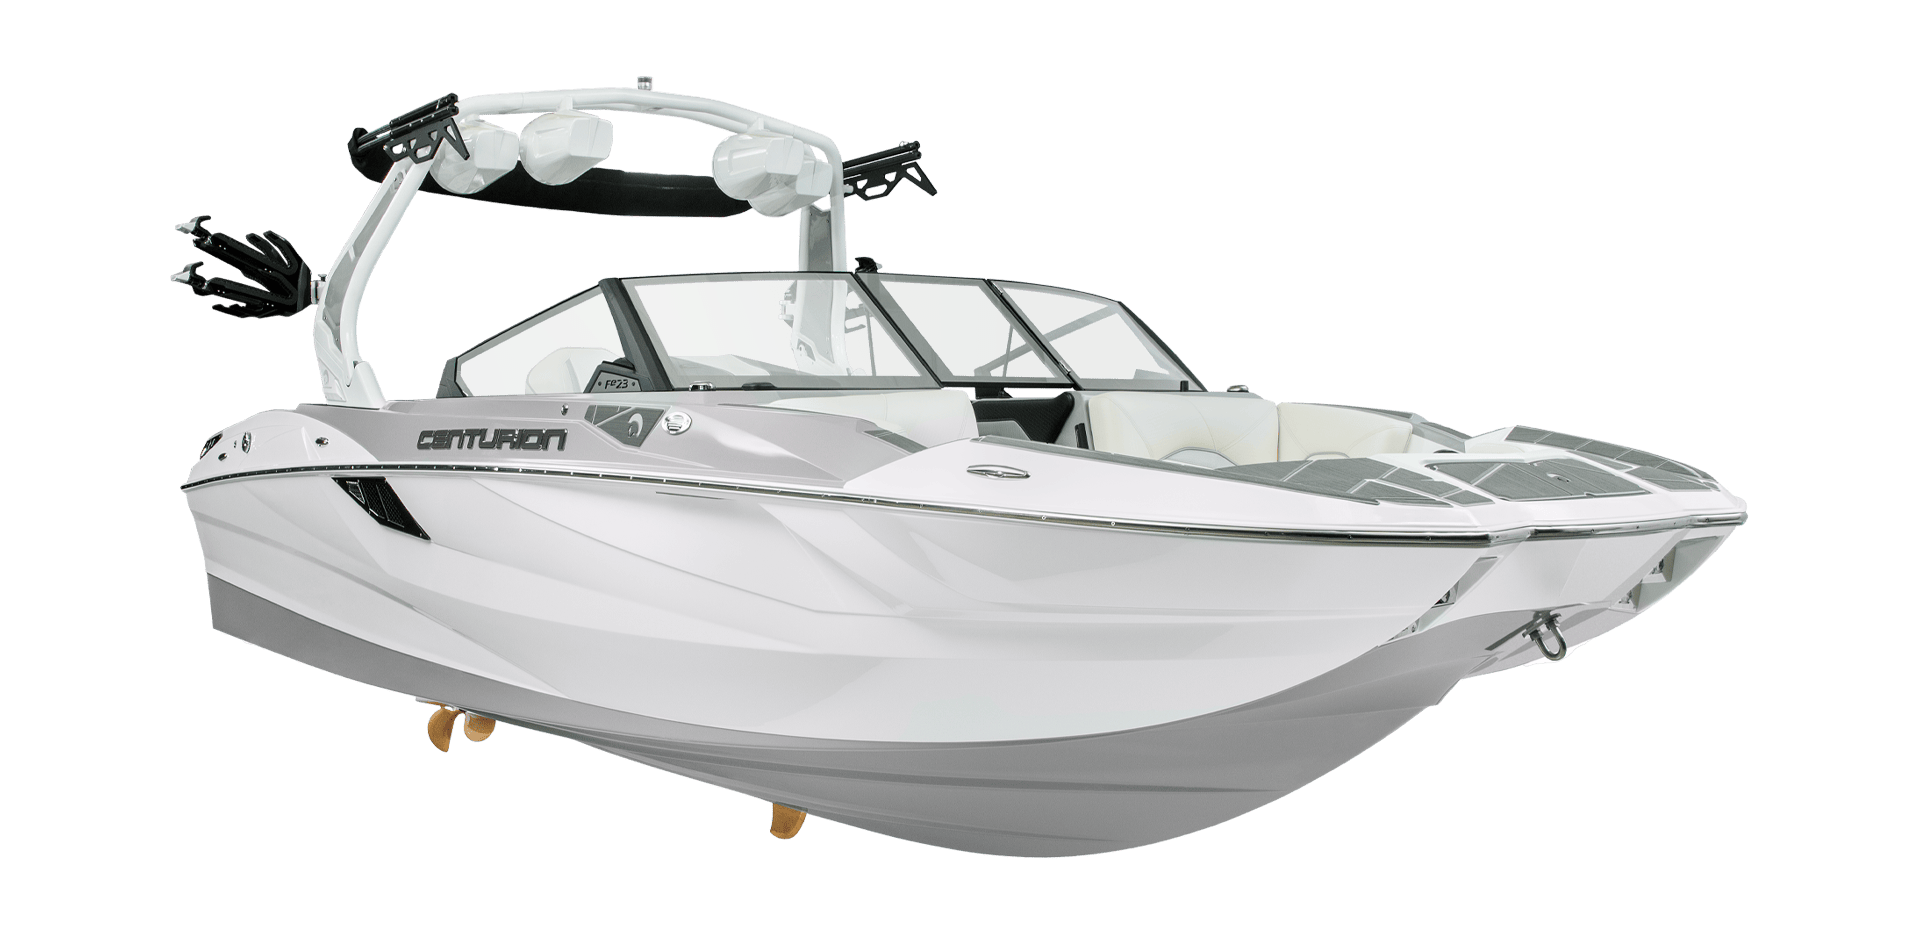 A white and gray recreational motorboat with a sleek design and modern features, displayed on a stand.